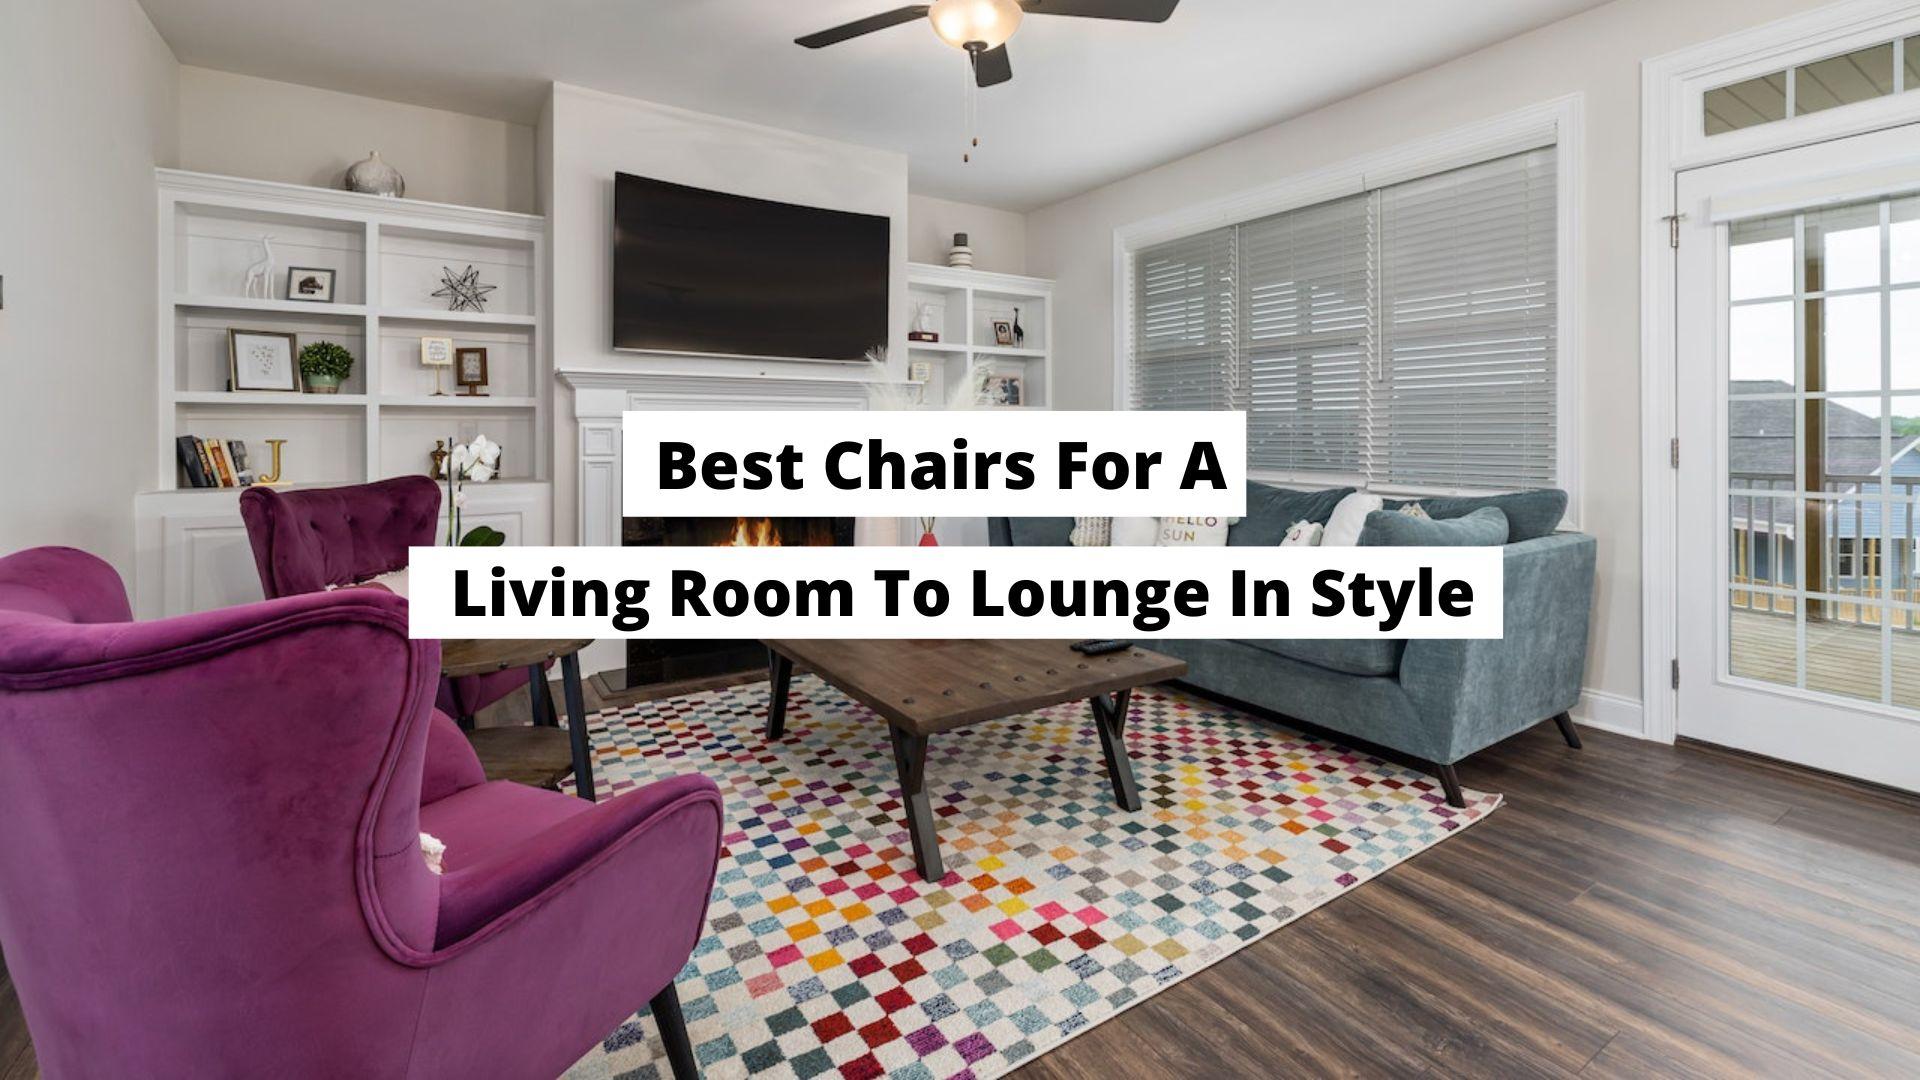 Best Chairs For A Living Room